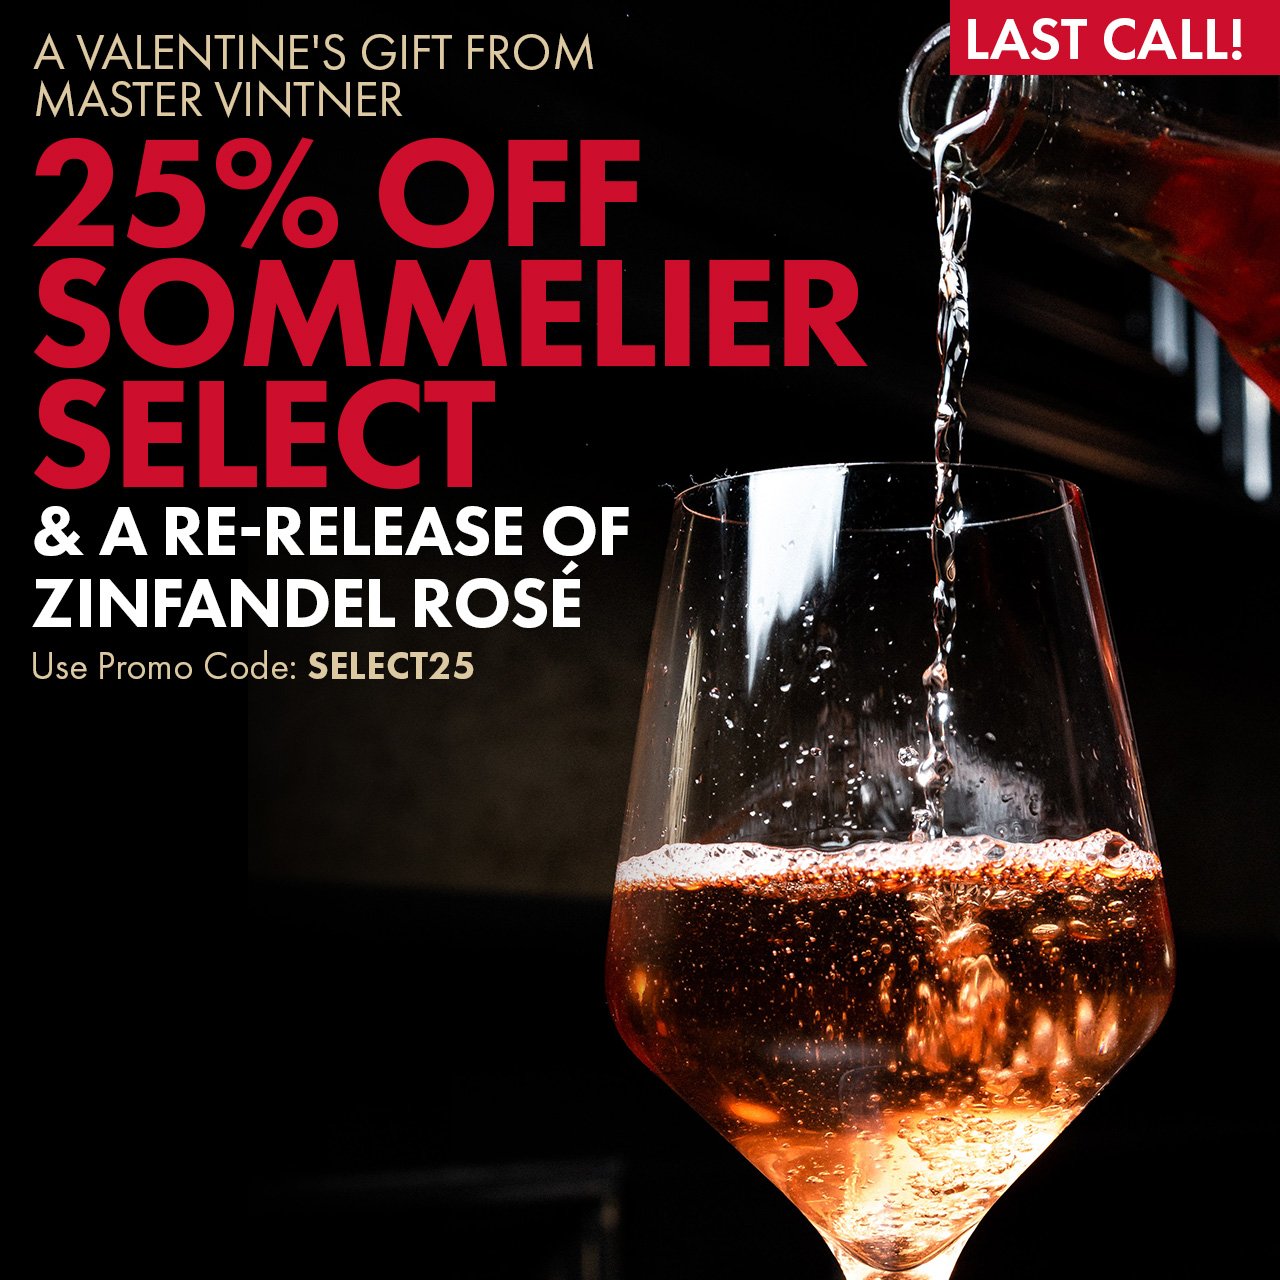 A Valentine's Gift from Master Vintner 25% Off Sommelier Select And a Re-release of Zinfandel Rose! Use Promo Code: SELECT25